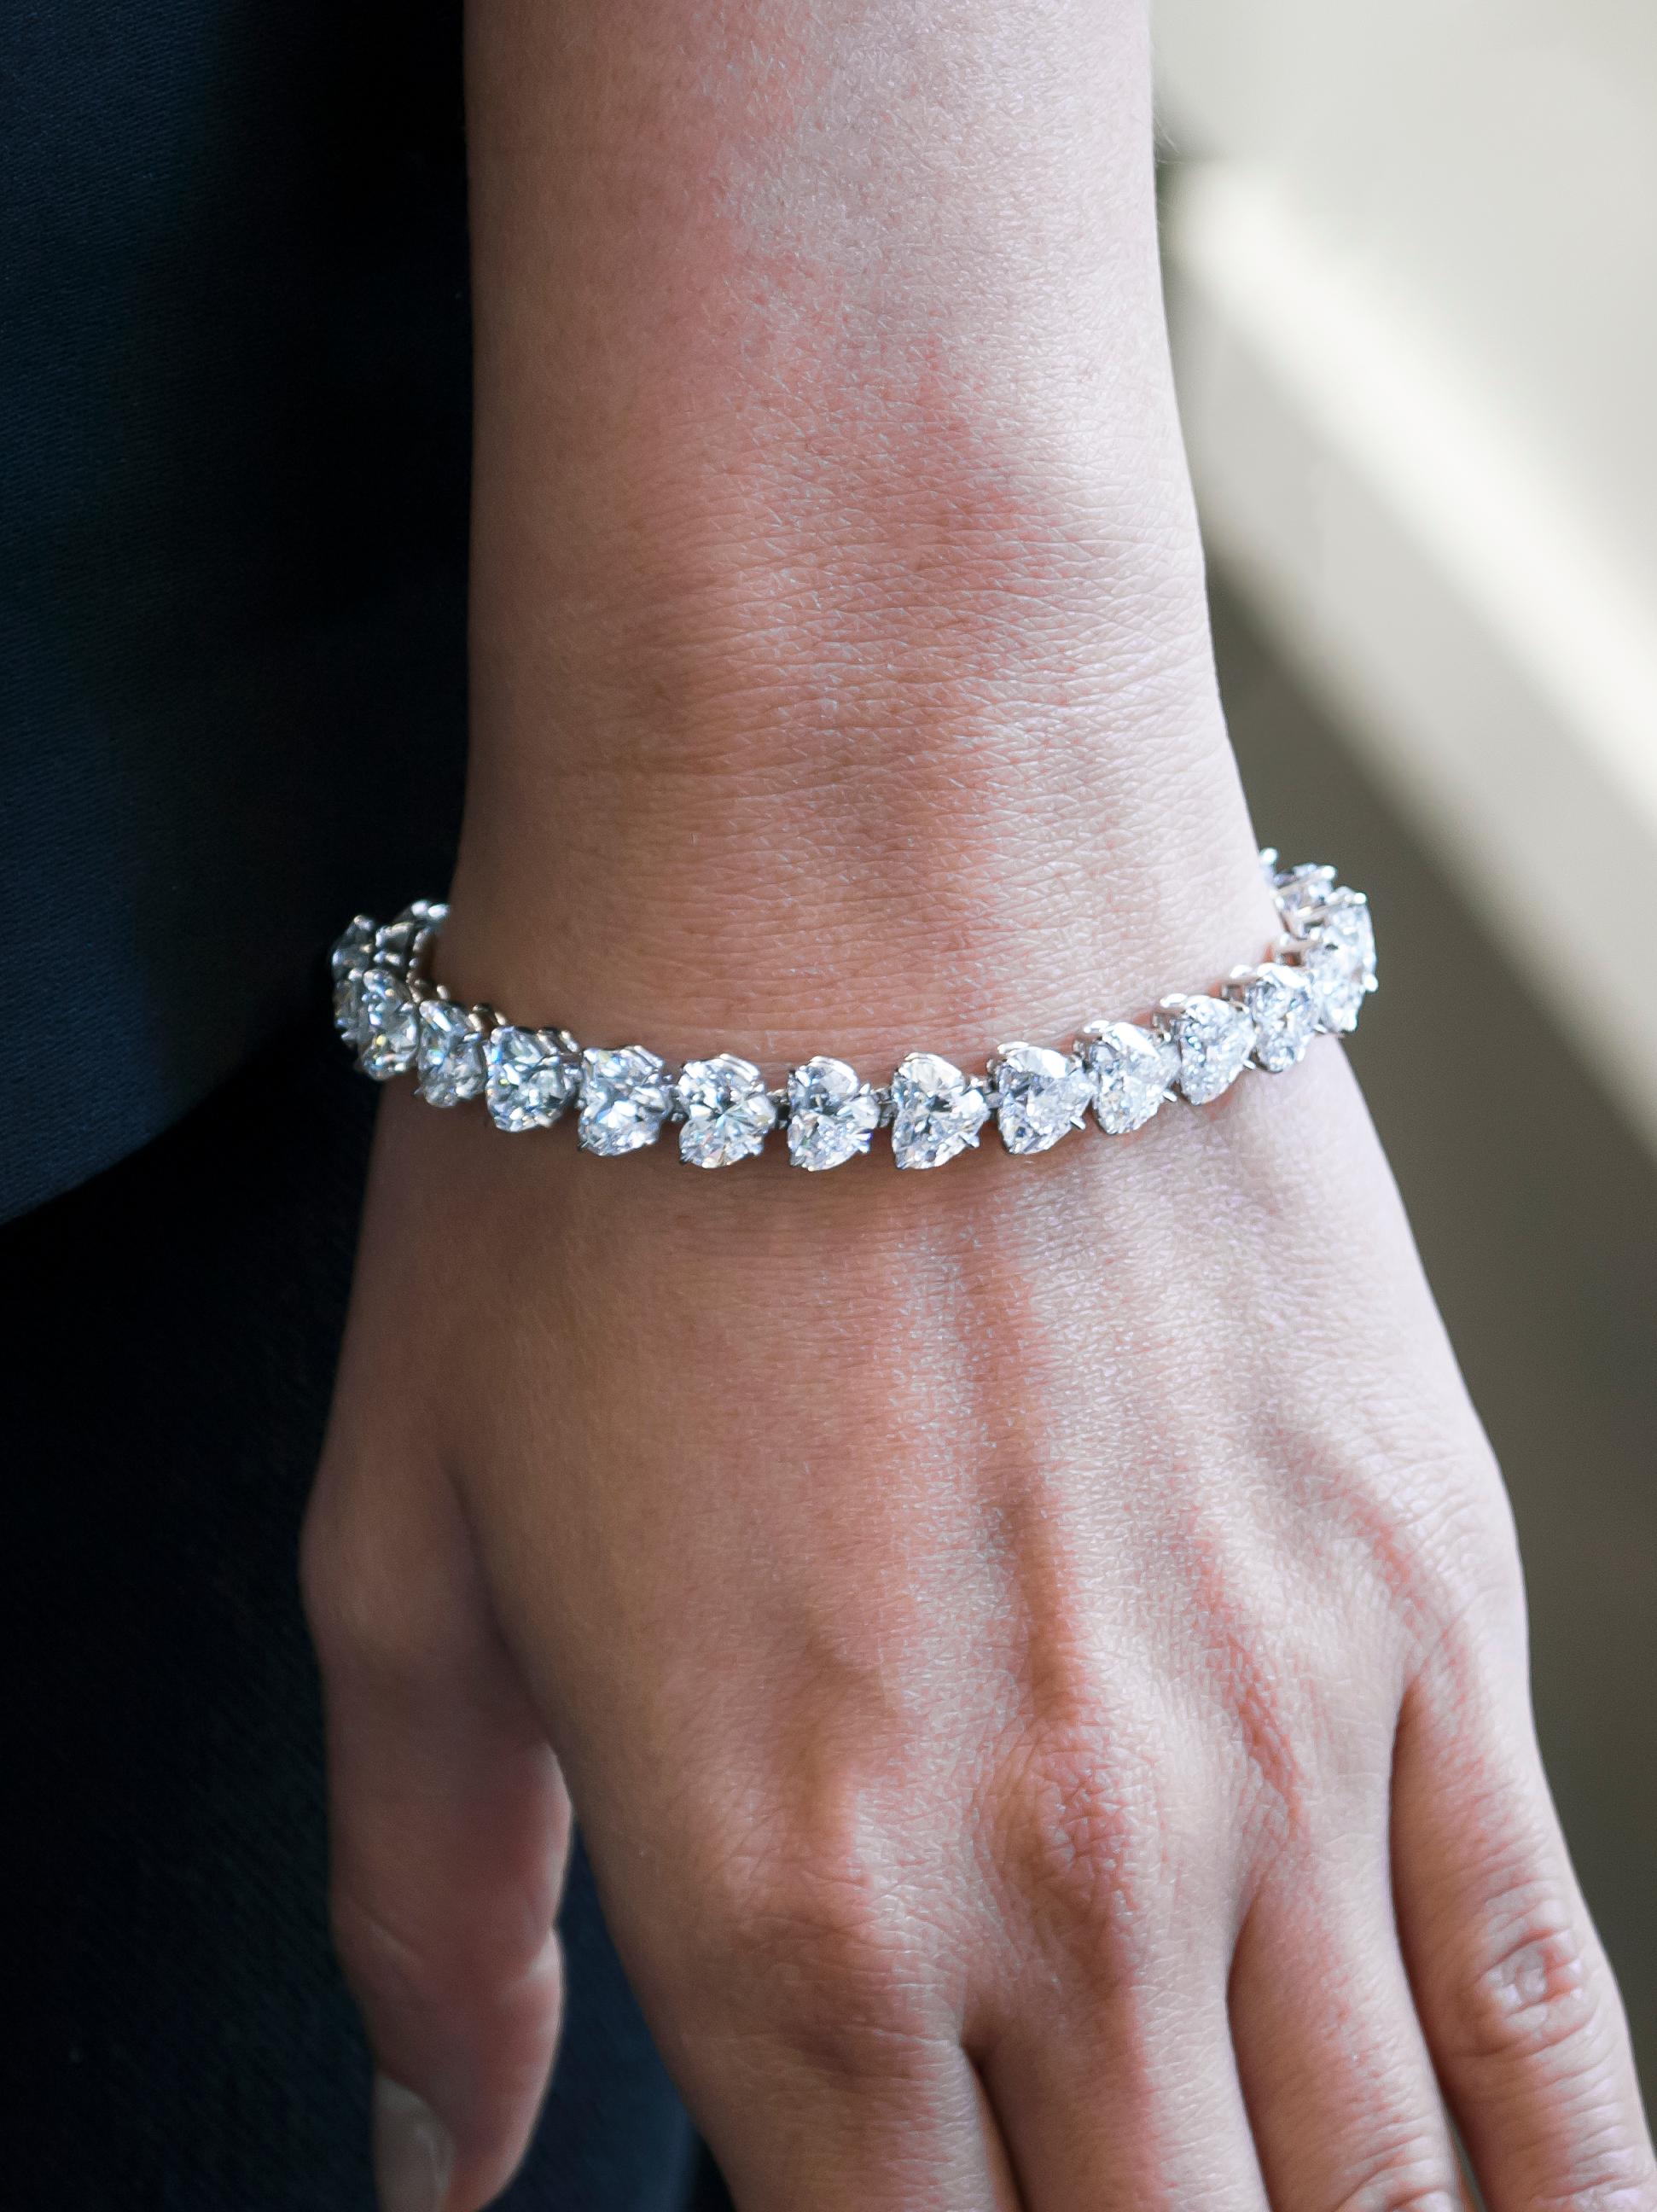 This incredible, one-of-a-kind diamond tennis bracelet from the vaults of J. Birnbach is for the true jewelry connoisseur... Featuring 26 GIA Certified Heart Shape diamonds = 23.65 carat total weight, D - G in color, IF - VS2 in clarity. The